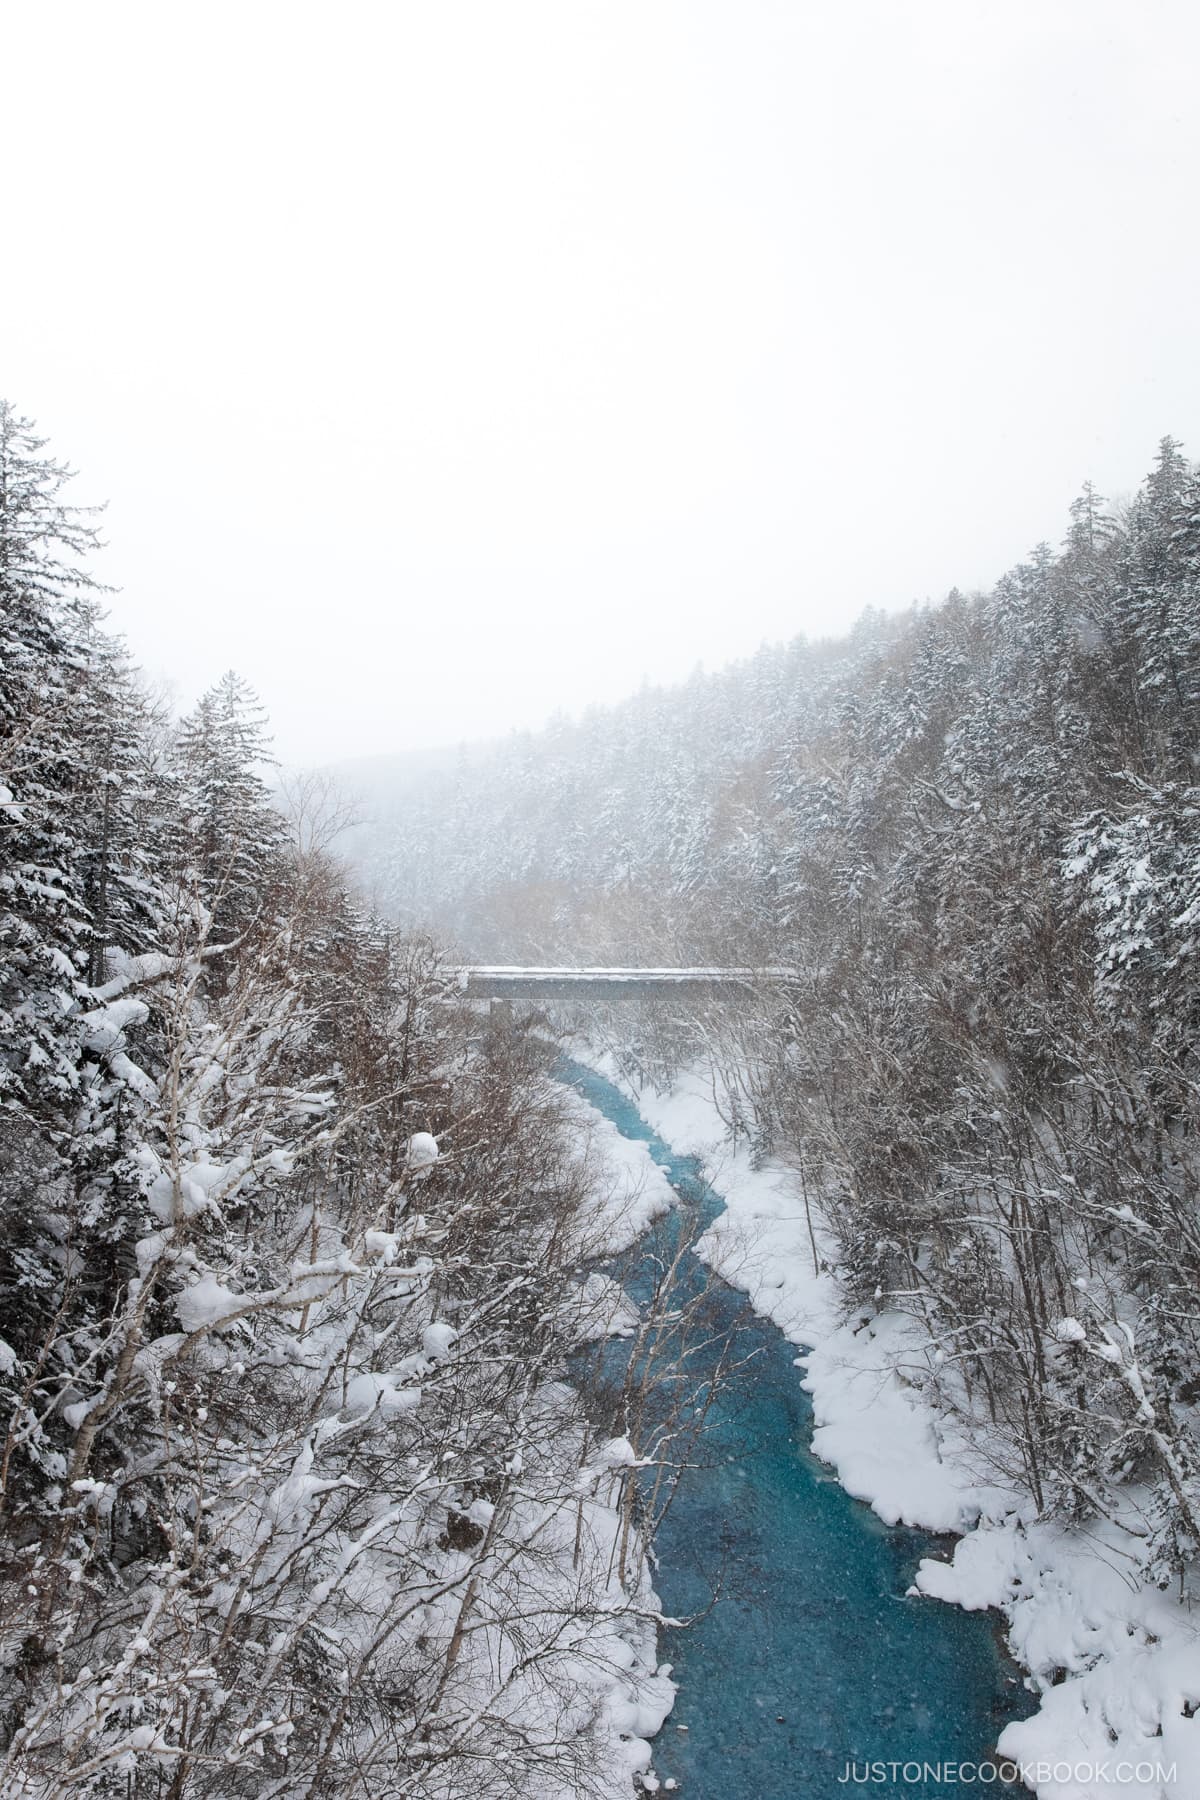 Blue river lined with snowy trees and a bridge in the background